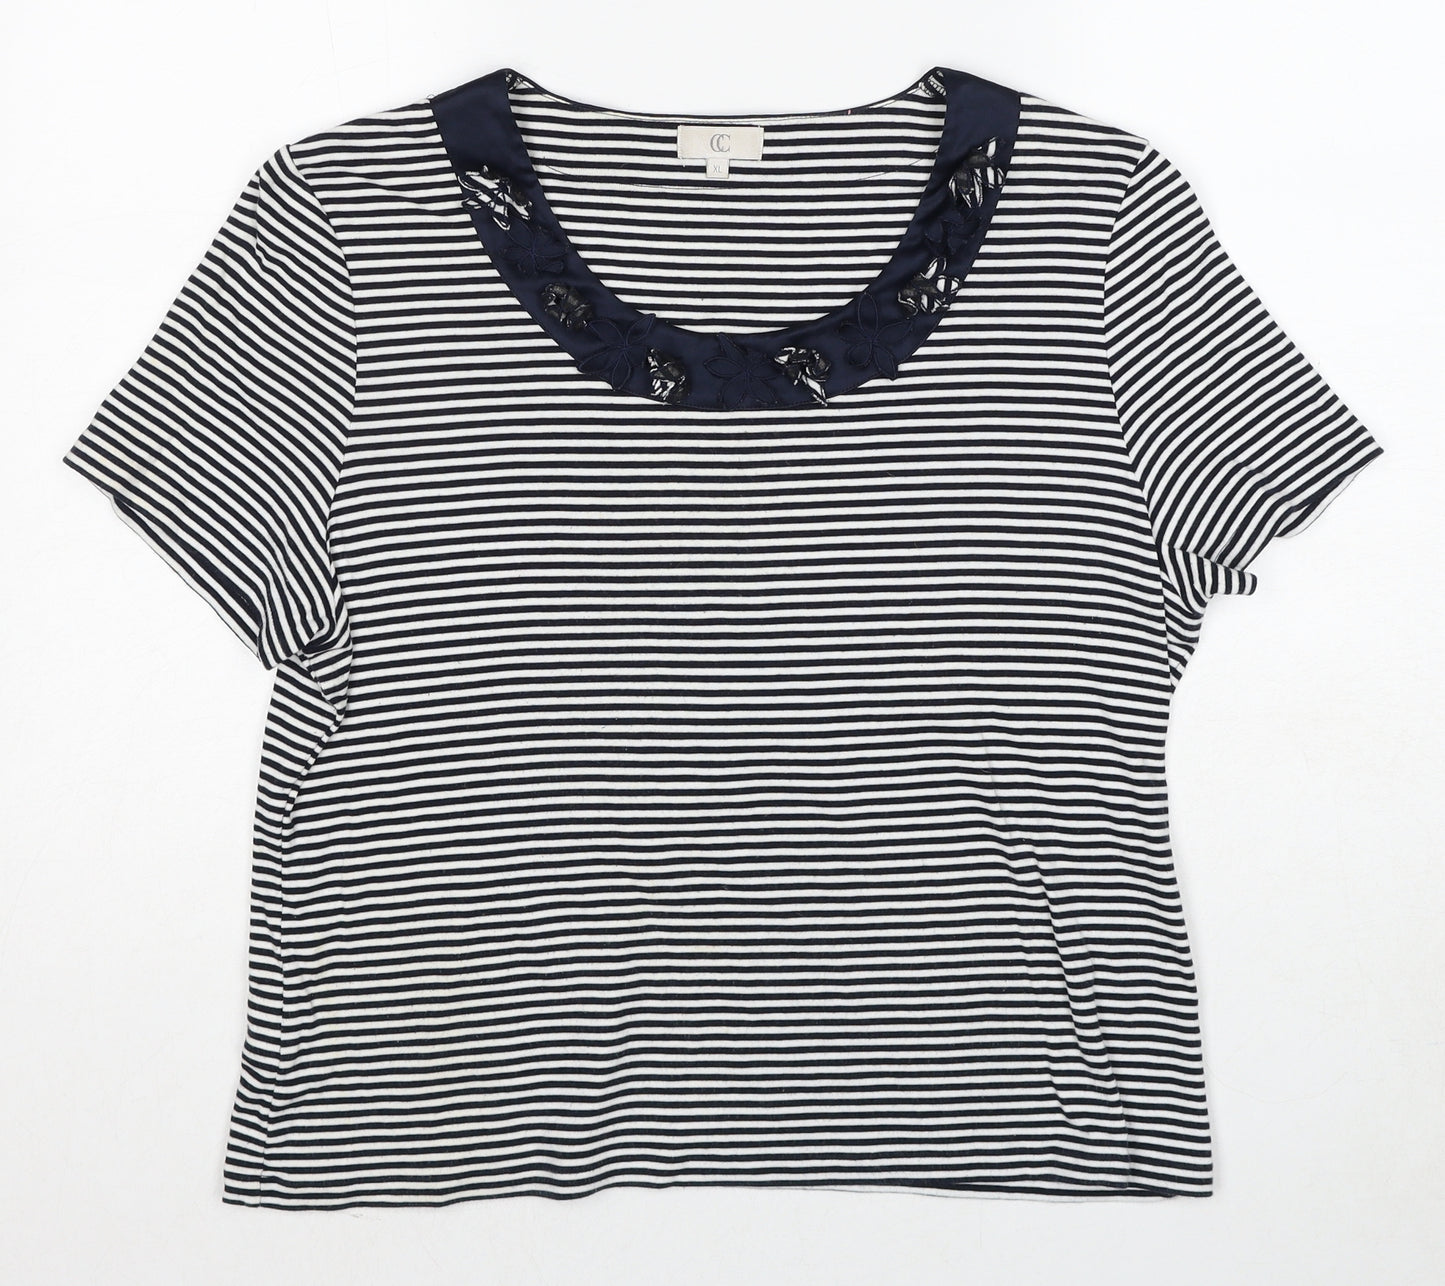 Country Casuals Womens Black Striped Cotton Basic T-Shirt Size XL Scoop Neck - Neckline Detail